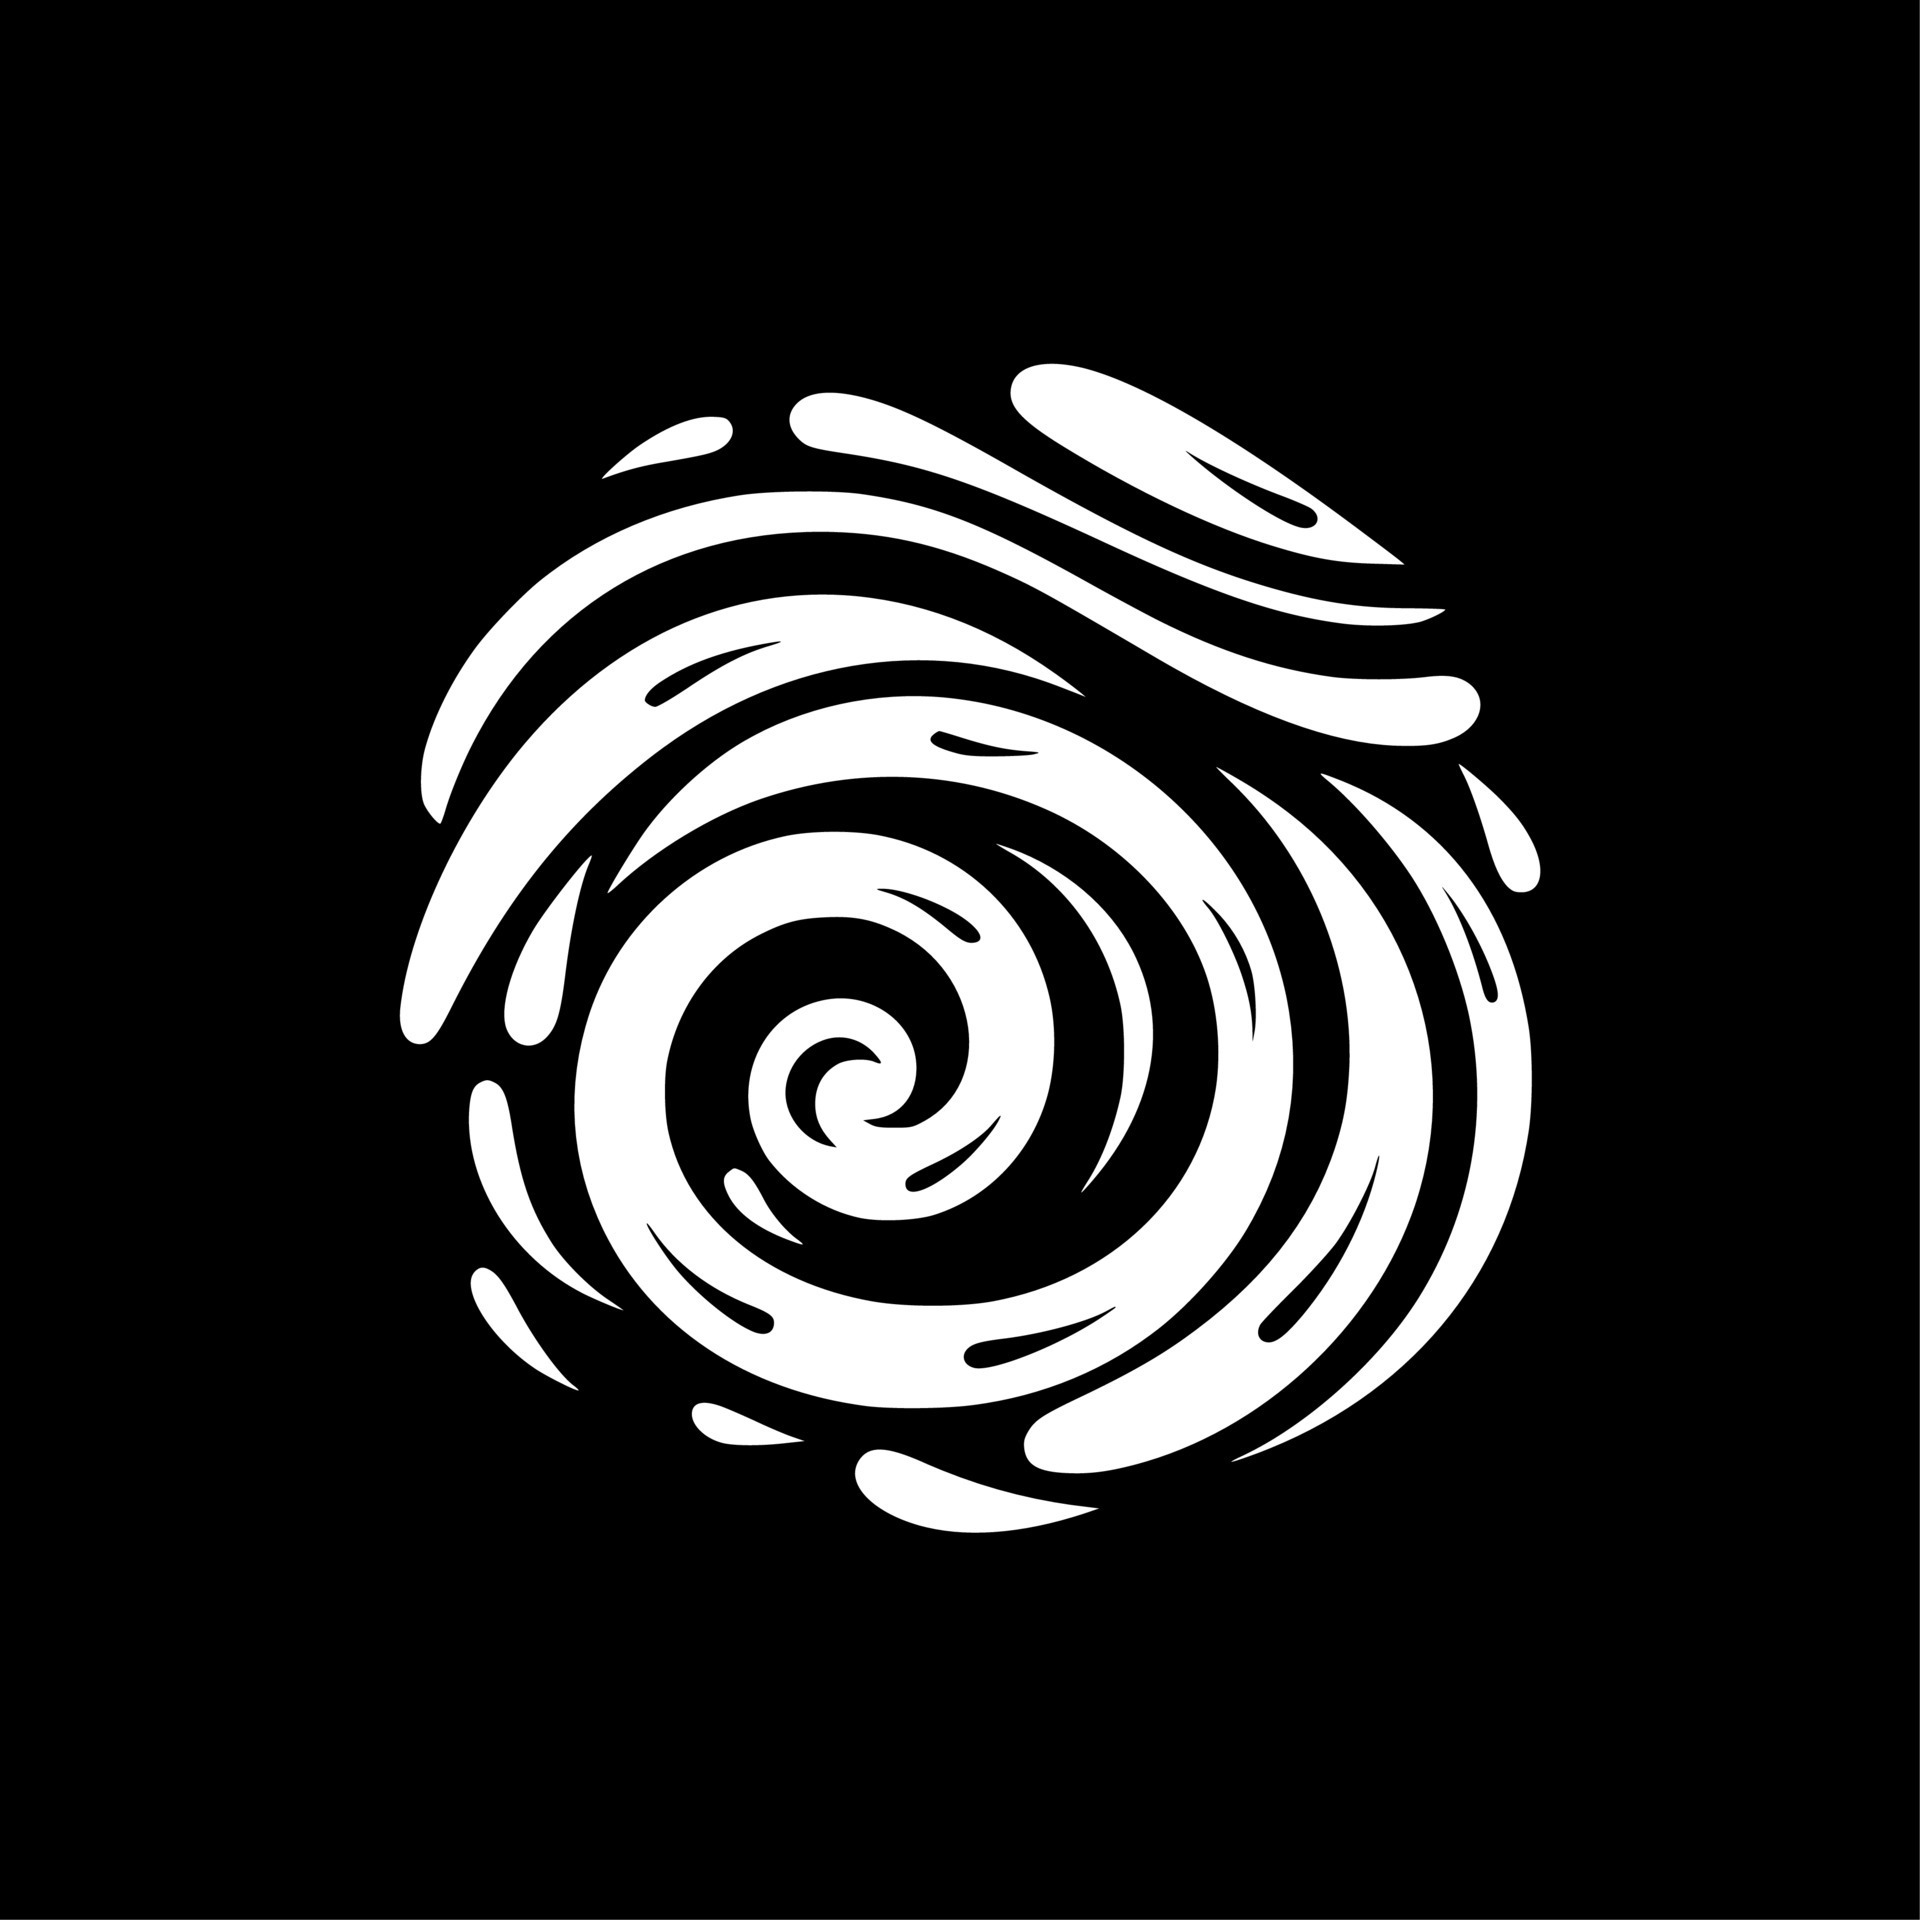 Spiral, Minimalist and Simple Silhouette - Vector illustration 24142627 ...